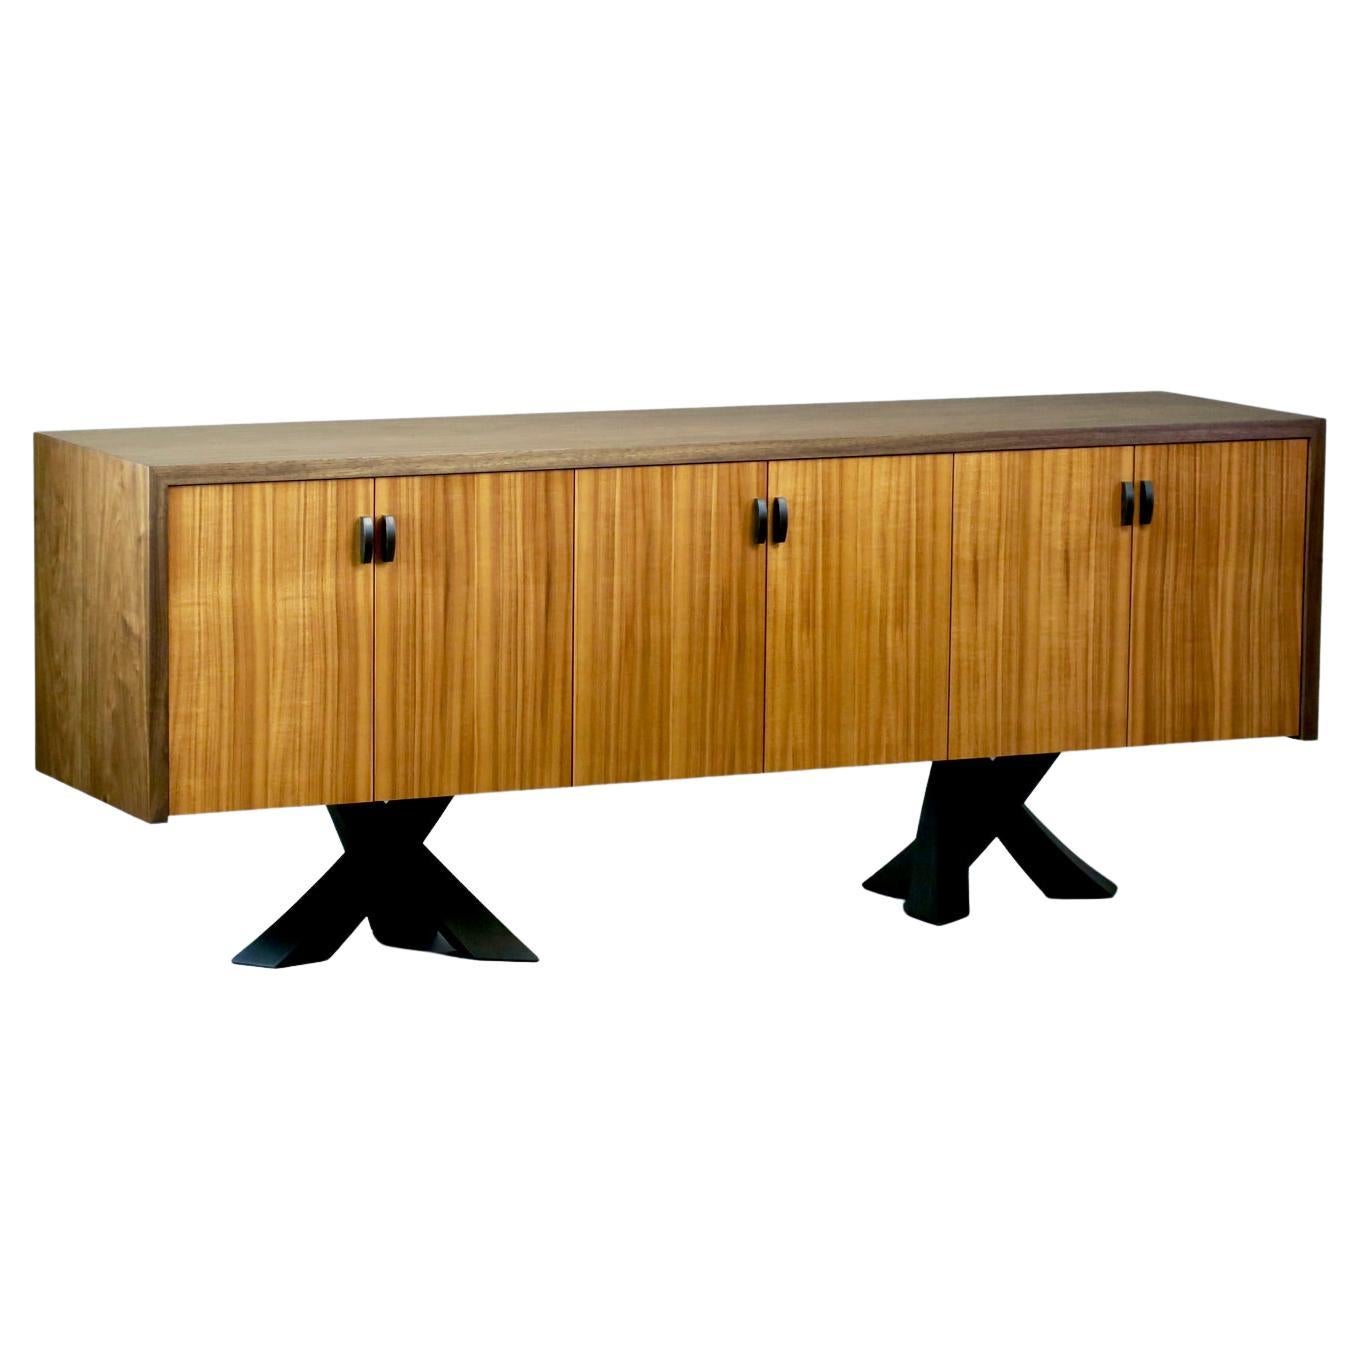 Modern Walnut and Koa Credenza with Sculptural Legs by Thomas Throop - In Stock For Sale